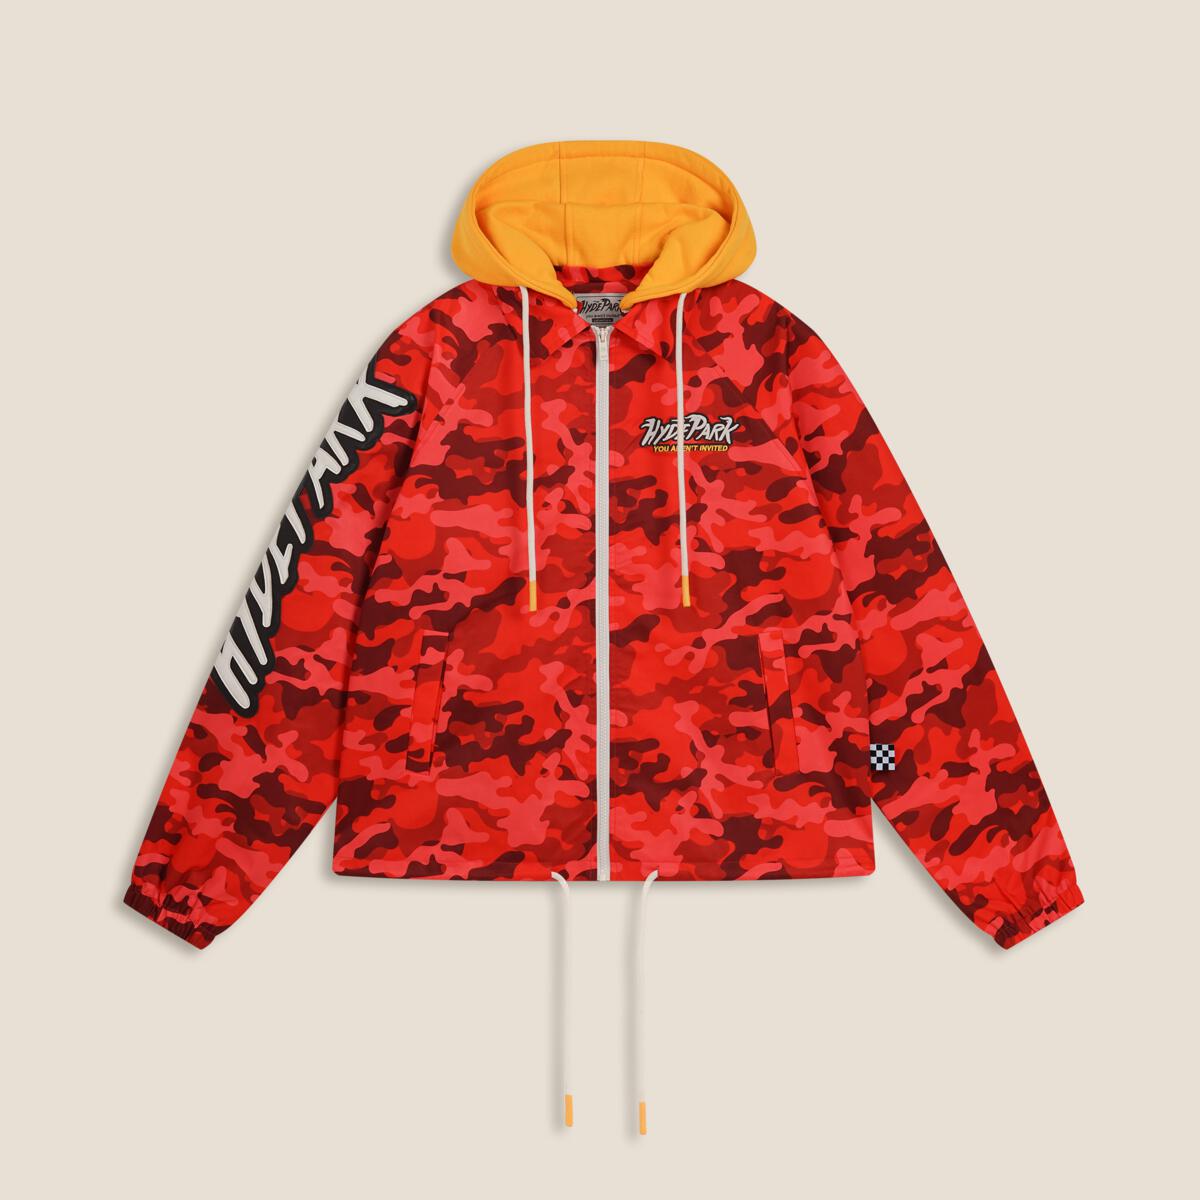 Hyde Park Find The Zip Coach Jacket - Red Camo